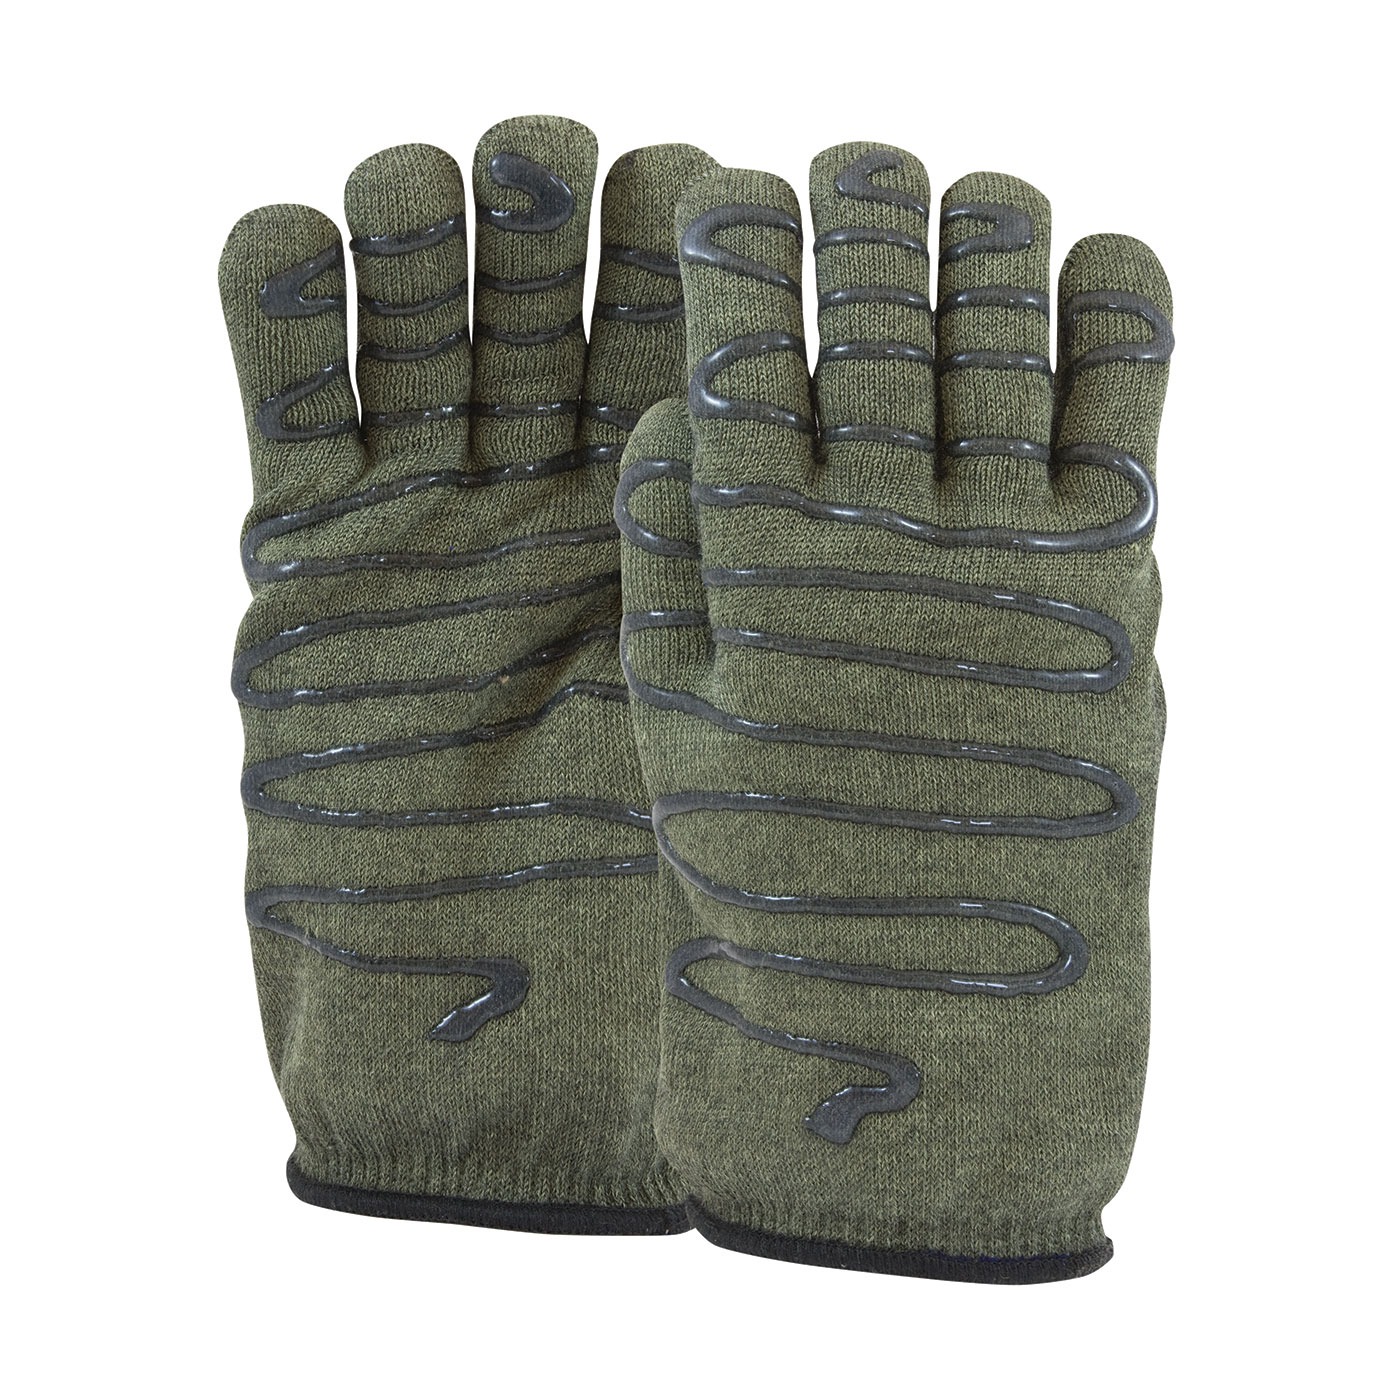 #43-851 PIP® Kut Gard®  Kevlar® / Preox Seamless Knit Hot Mill Glove with Cotton Liner and Double-Sided SilaGrip™ Coating